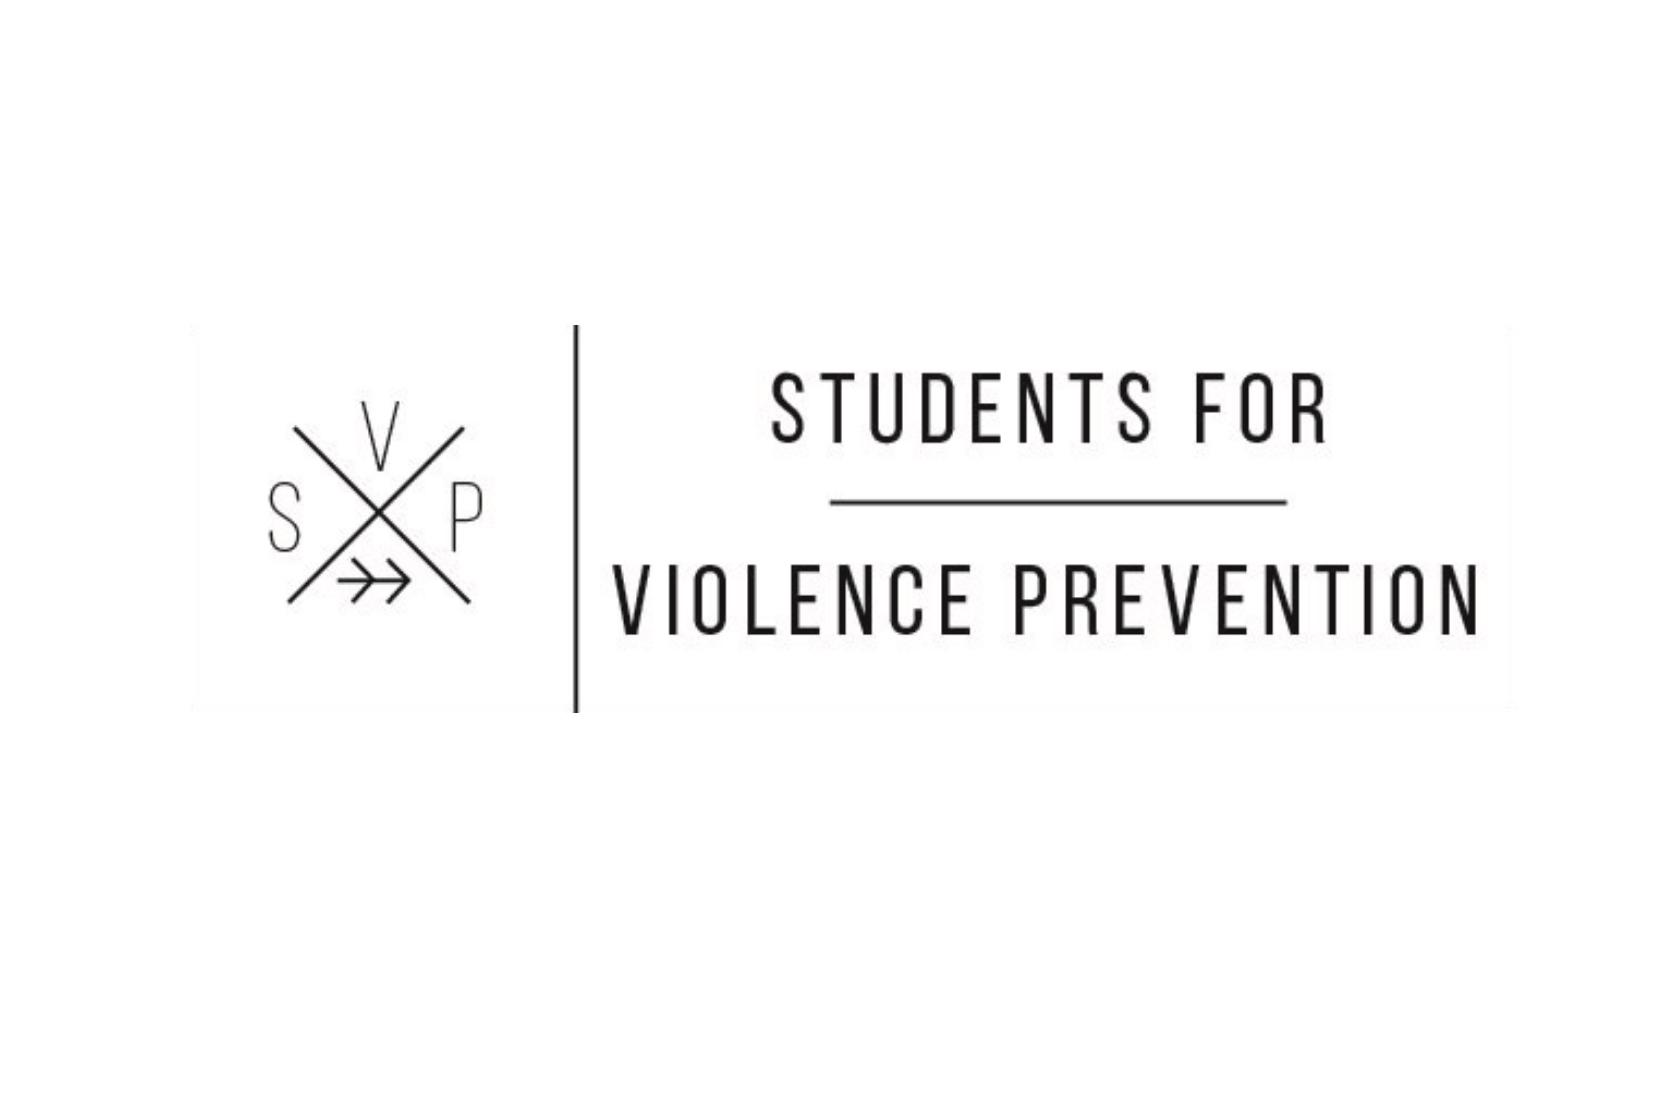 Students for Violence Prevention